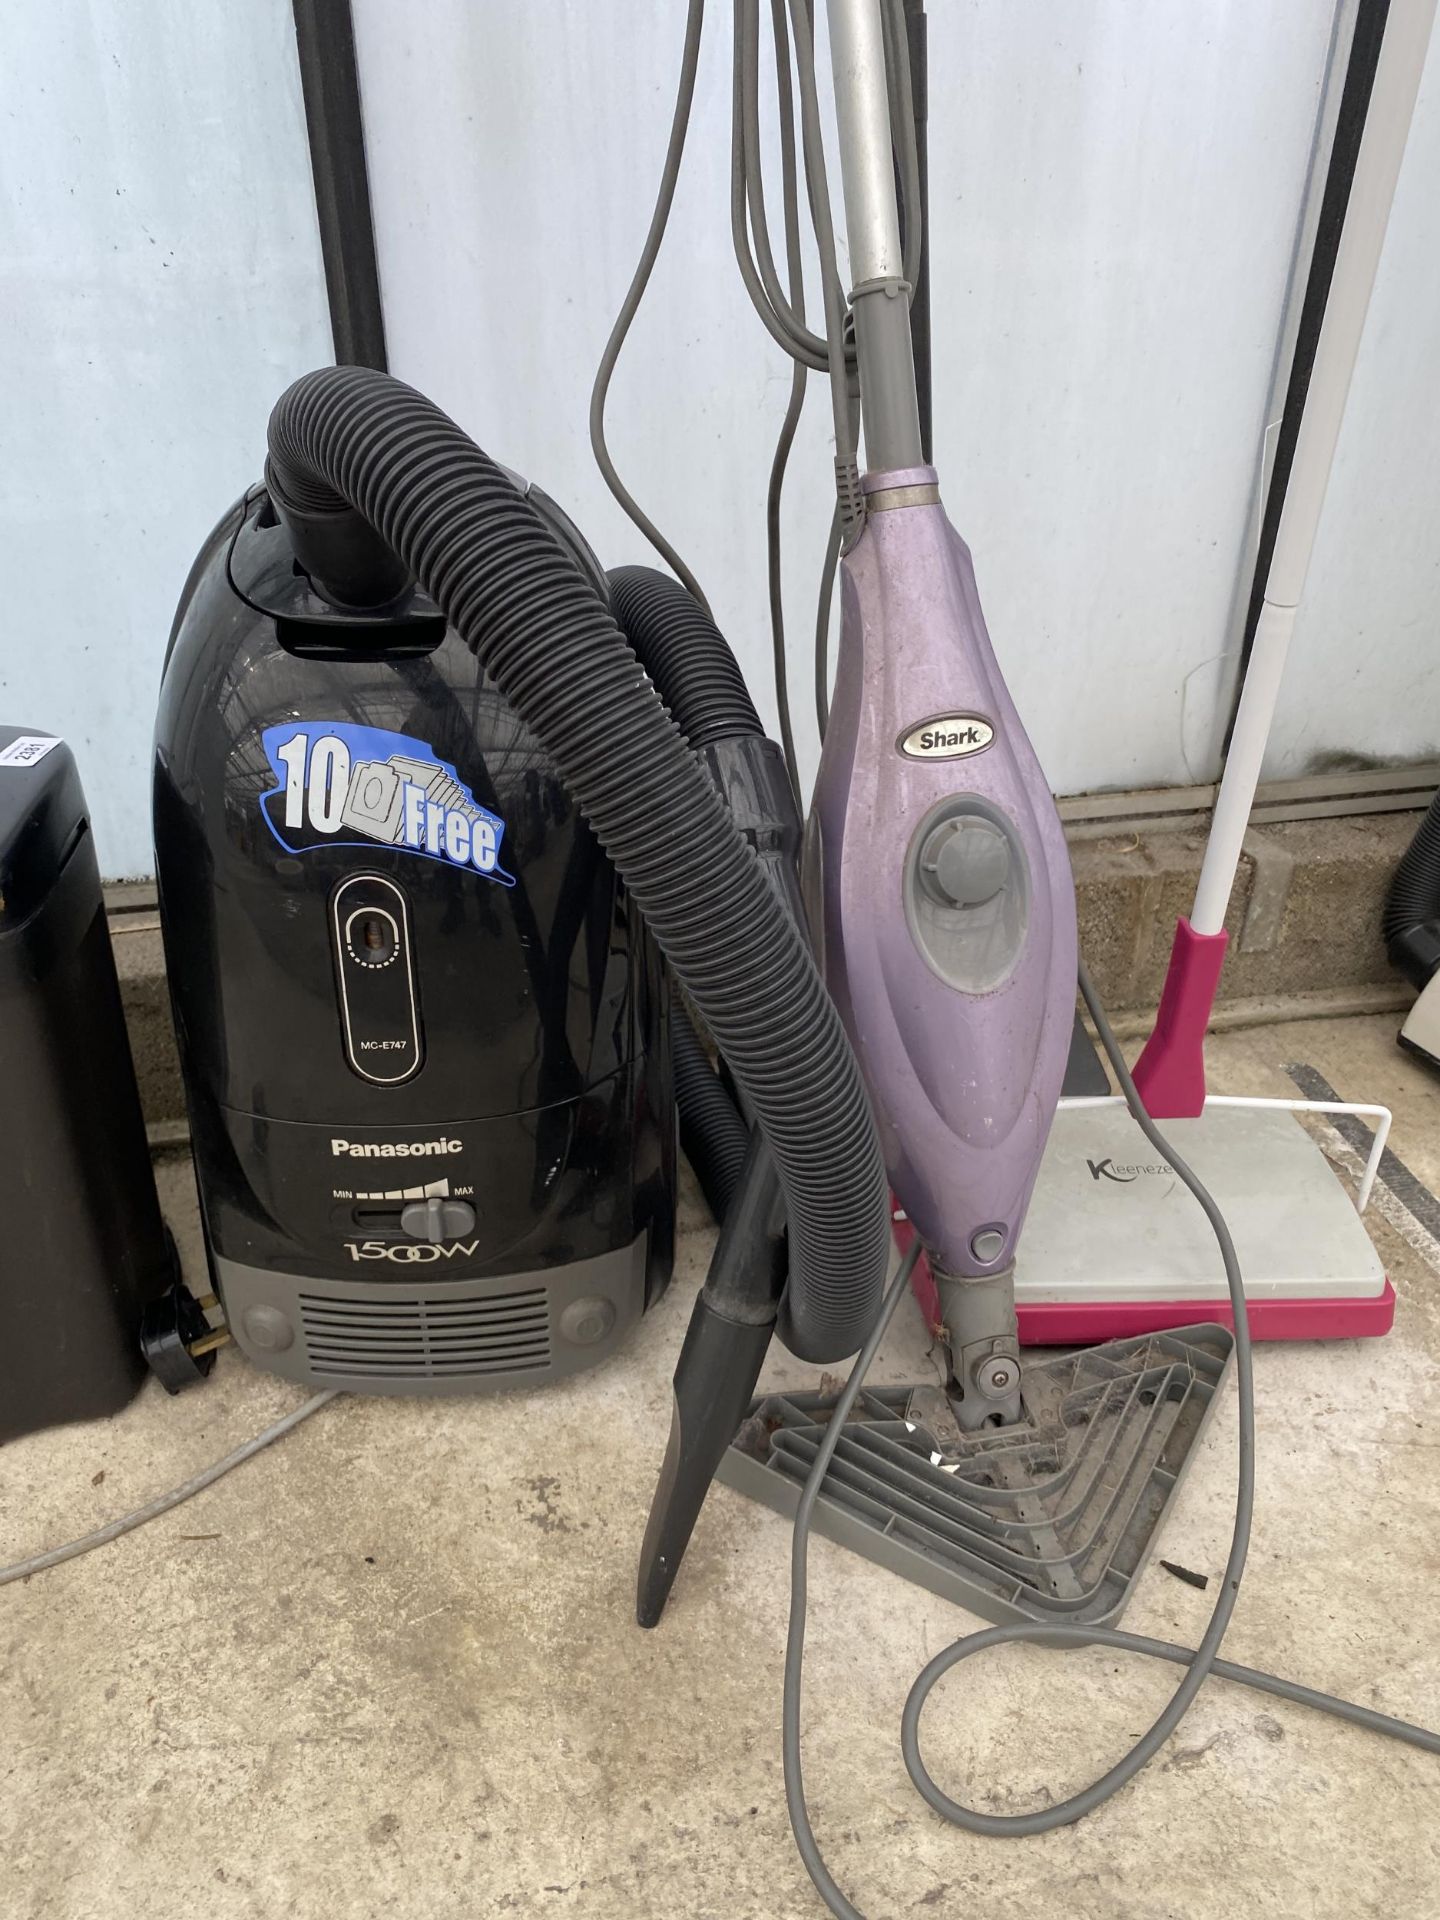 AN ASSORTMENT OF ITEMS TO INCLUDE A PANASONIC VACUUM CLEANER, A SHARK STEAM MOP AND A PAPER SHREDDER - Image 2 of 2